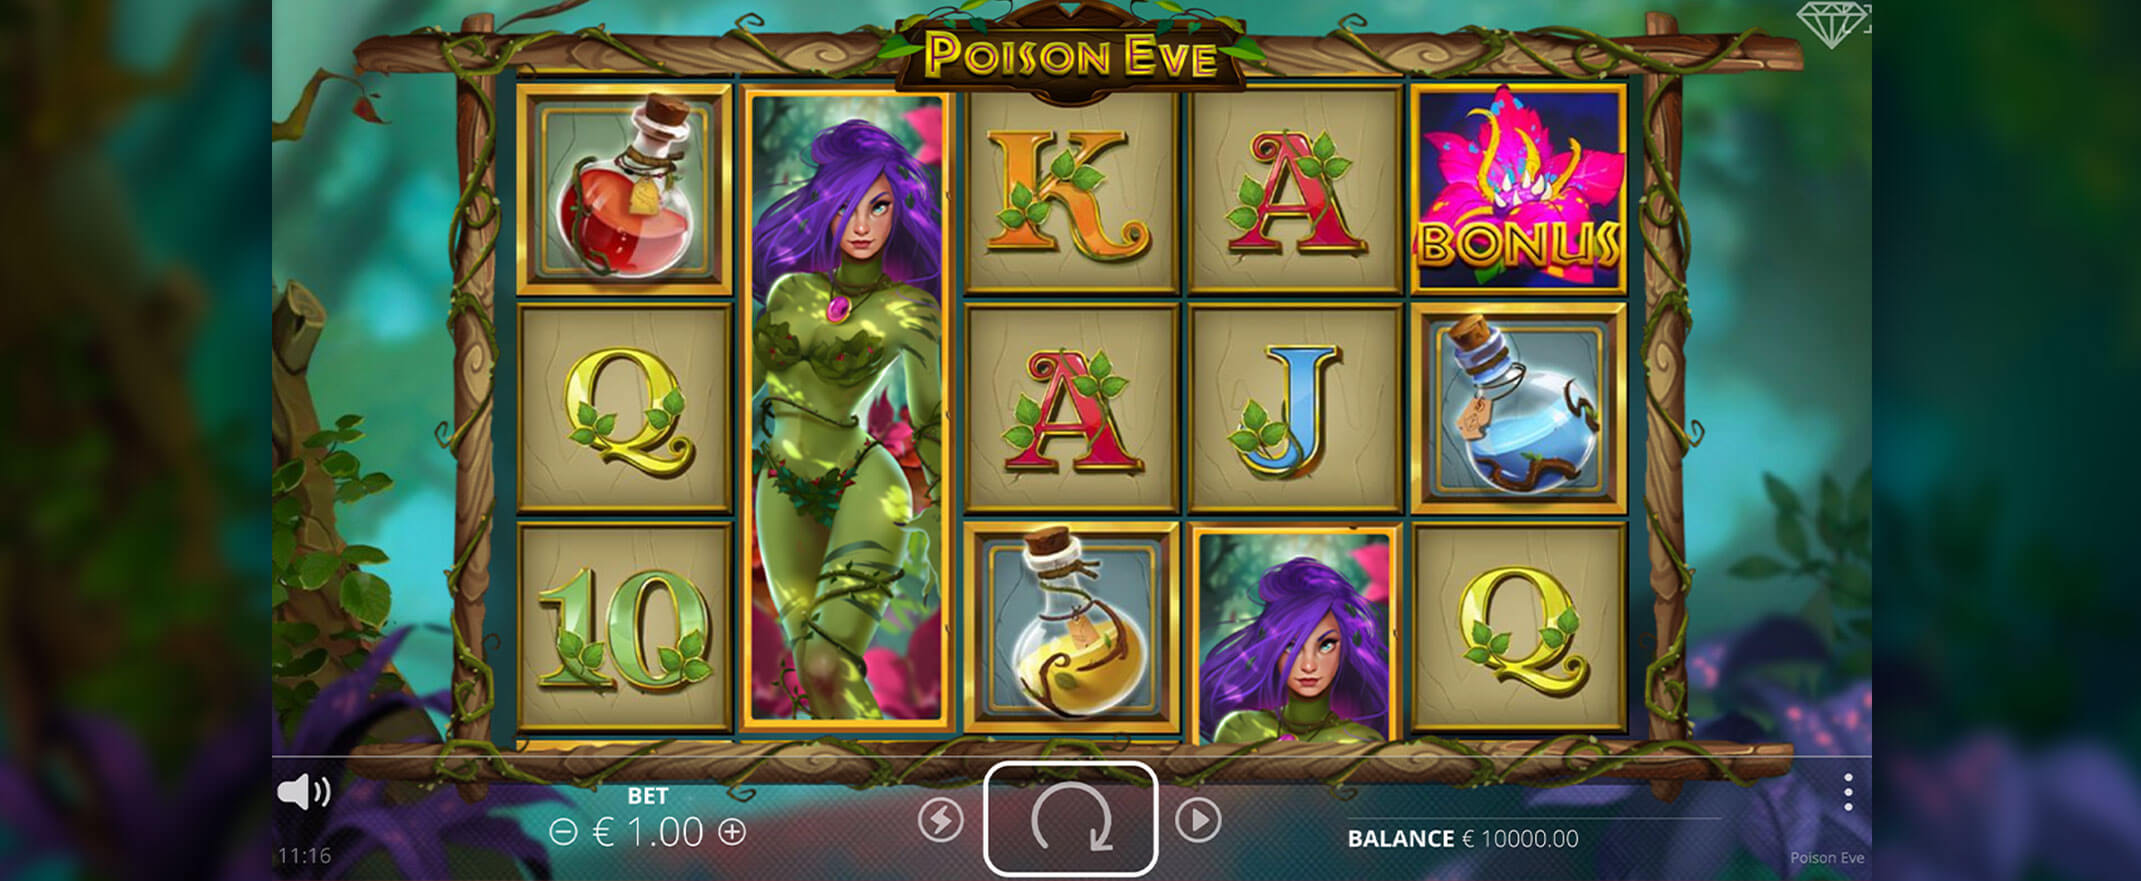 Poison Eve slot review